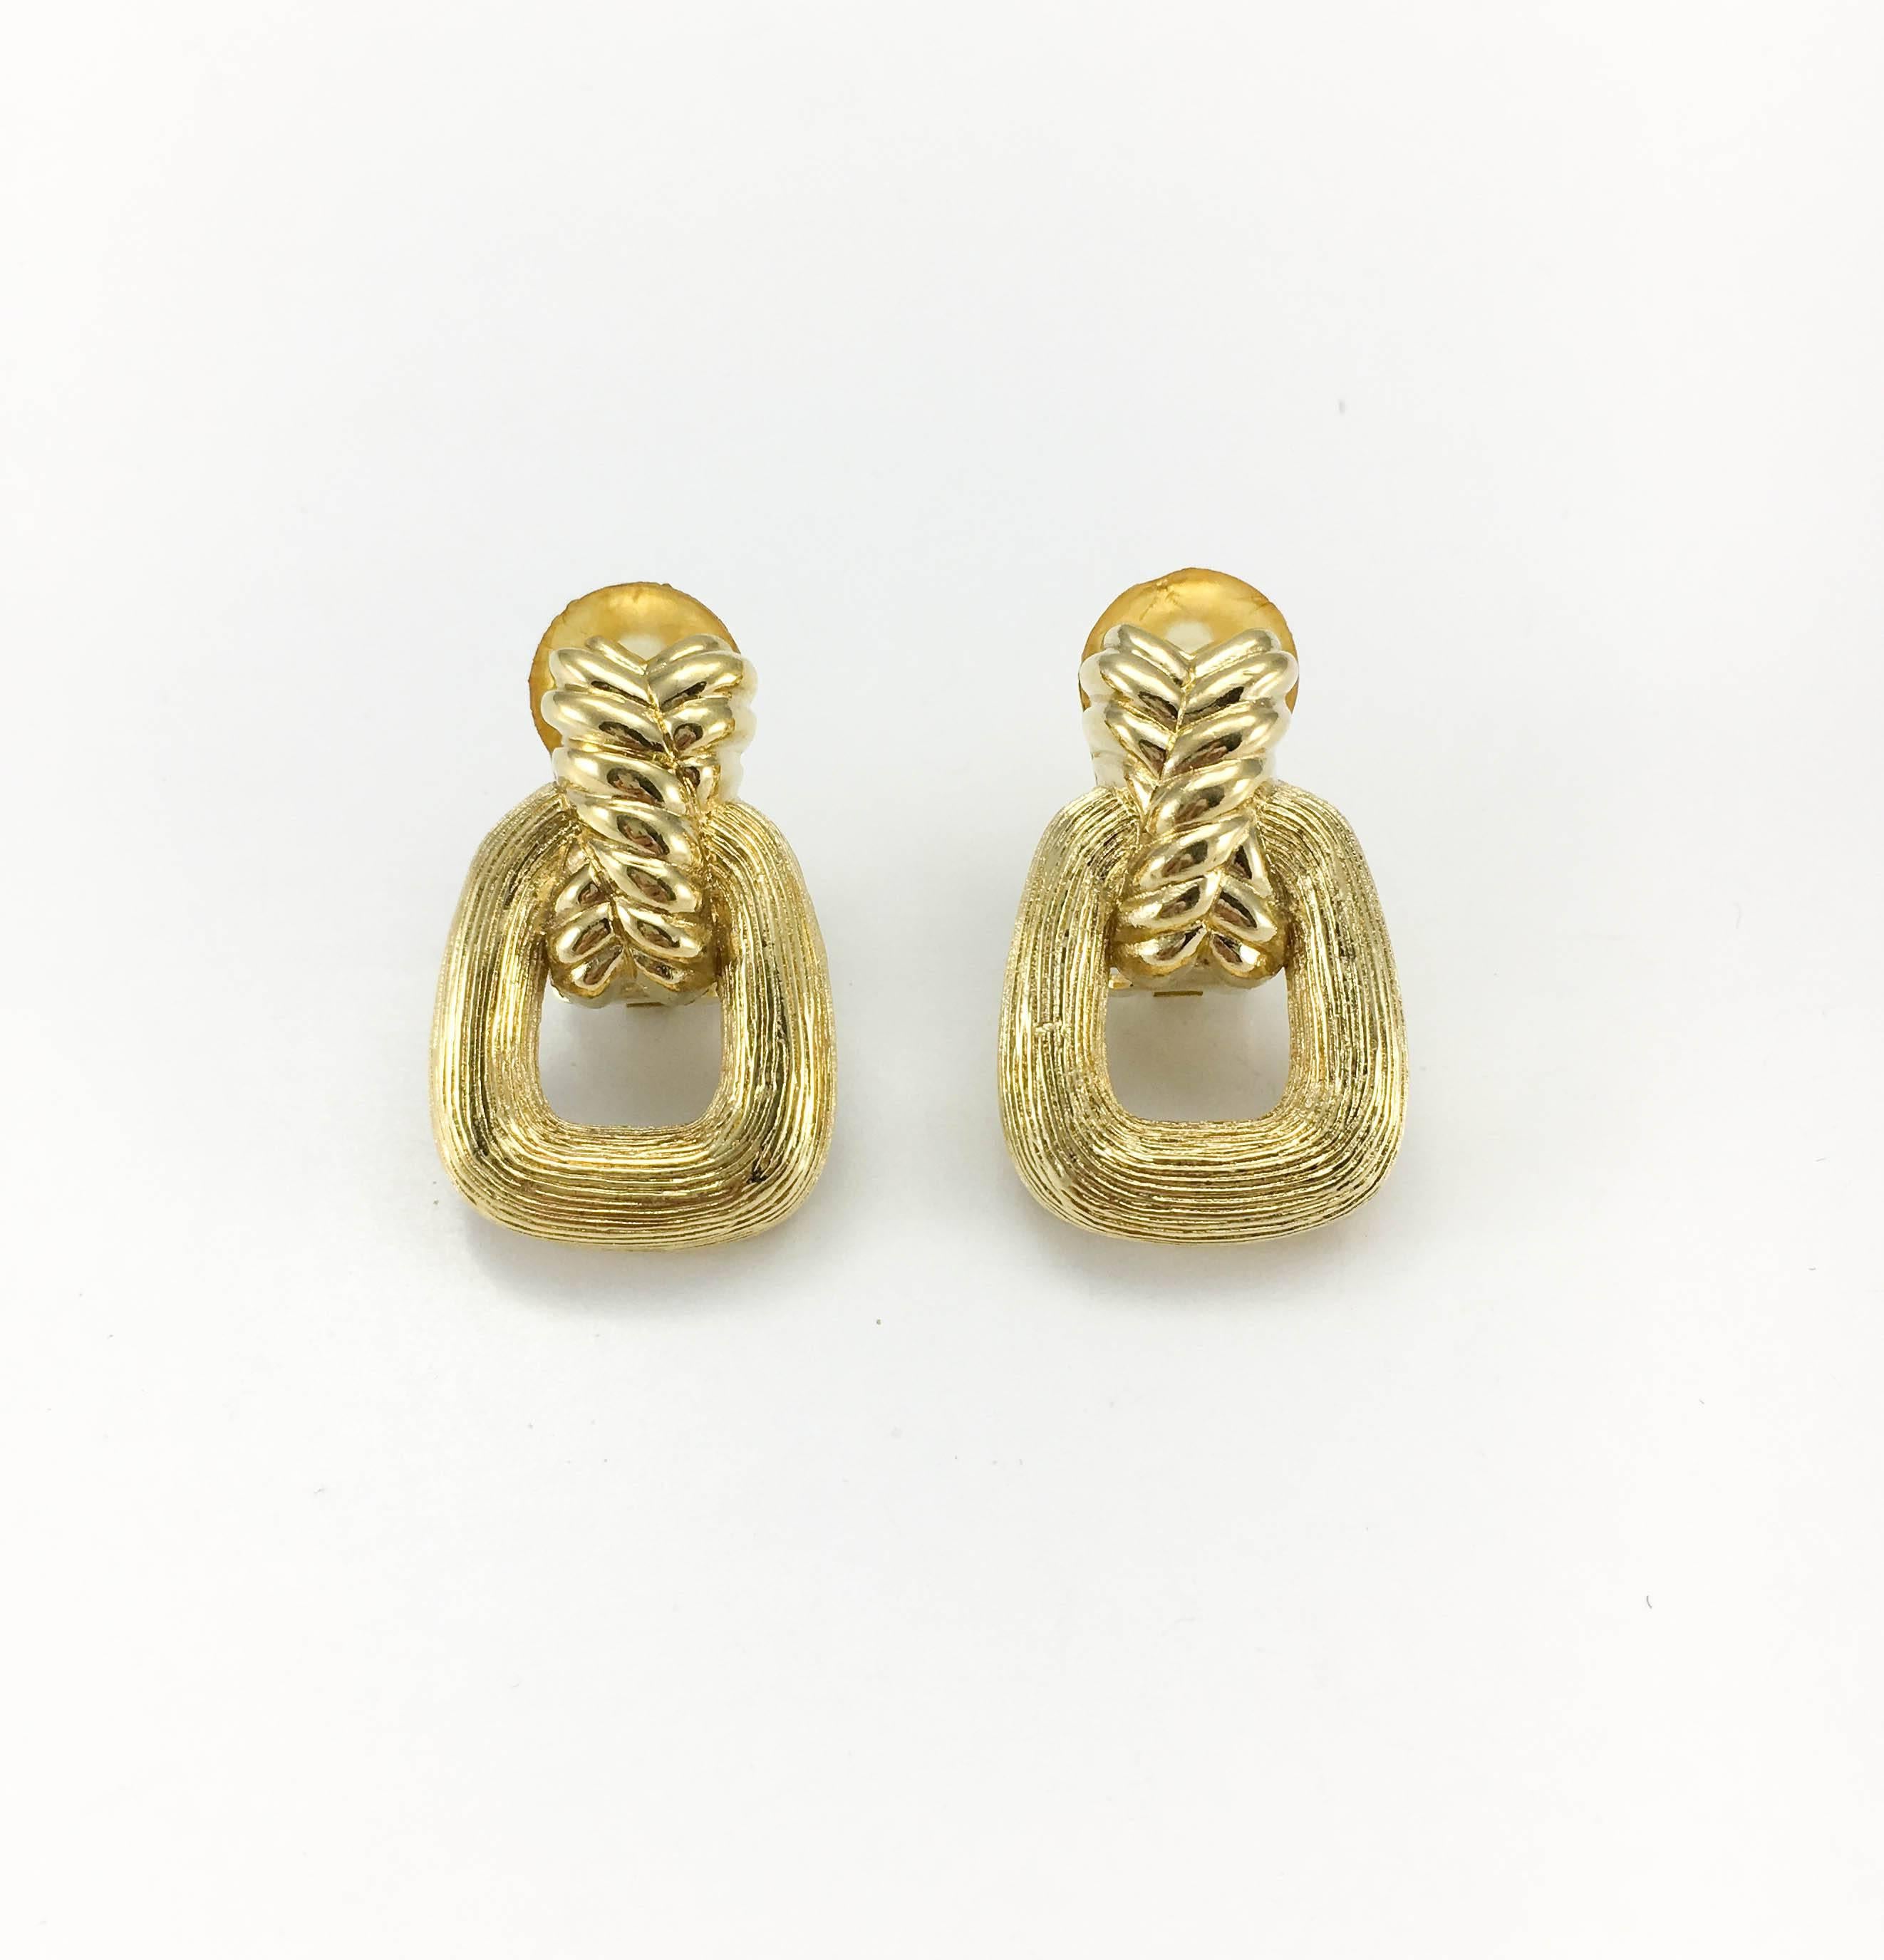 Elegant Vintage Christian Dior Gold-Tone Clip-On Earrings. These stylish earrings by Dior were made in the 1980’s in Germany. Ch Dior signed on the back. A classy way to add a bit of 1980’s glam to a look.

Label / Designer: Dior

Period: